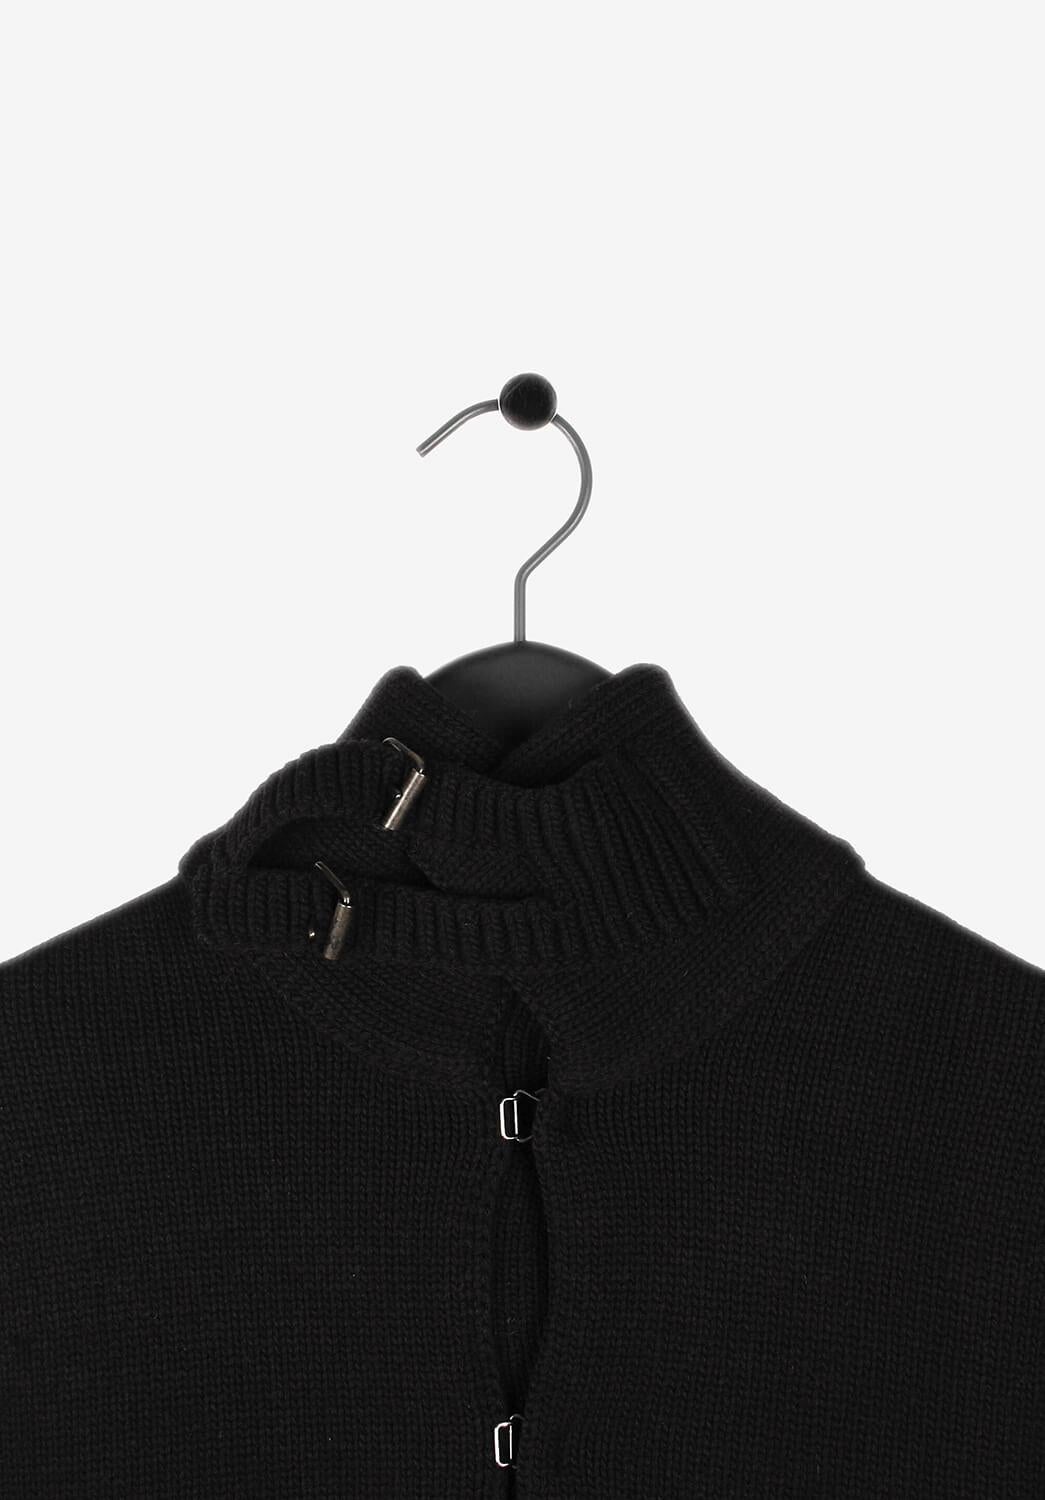 Item for sale is 100% genuine vintage Yves Saint Laurent Men Rive Gauche Cardigan Merino Wool Sweater/S019
Color: Black
(An actual color may a bit vary due to individual computer screen interpretation)
Material: 100% merino wool
Tag size: M
This